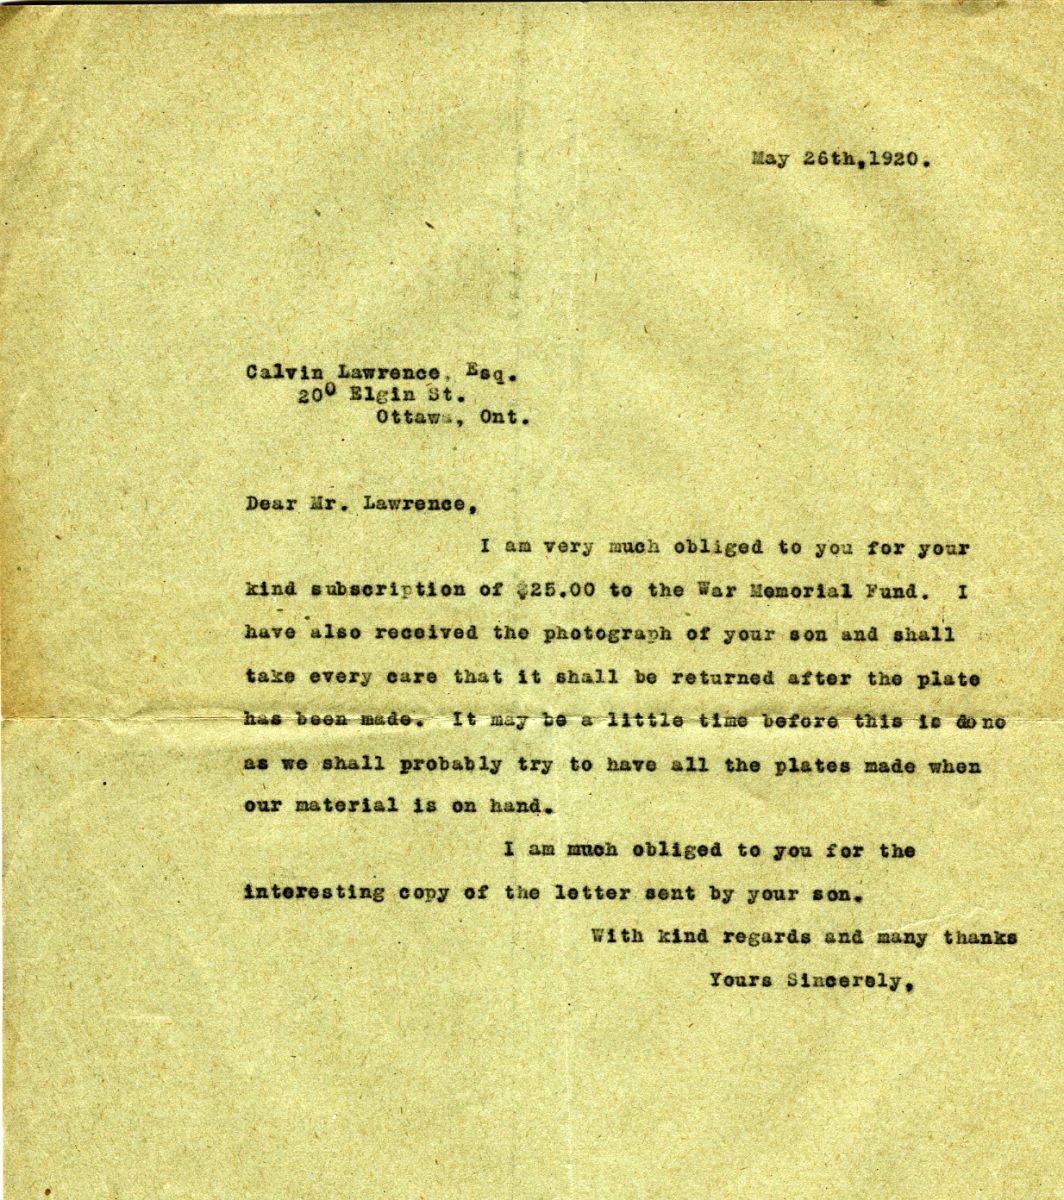 Letter from Queen's University to Mr. Calvin Lawrence, 26th May 1920